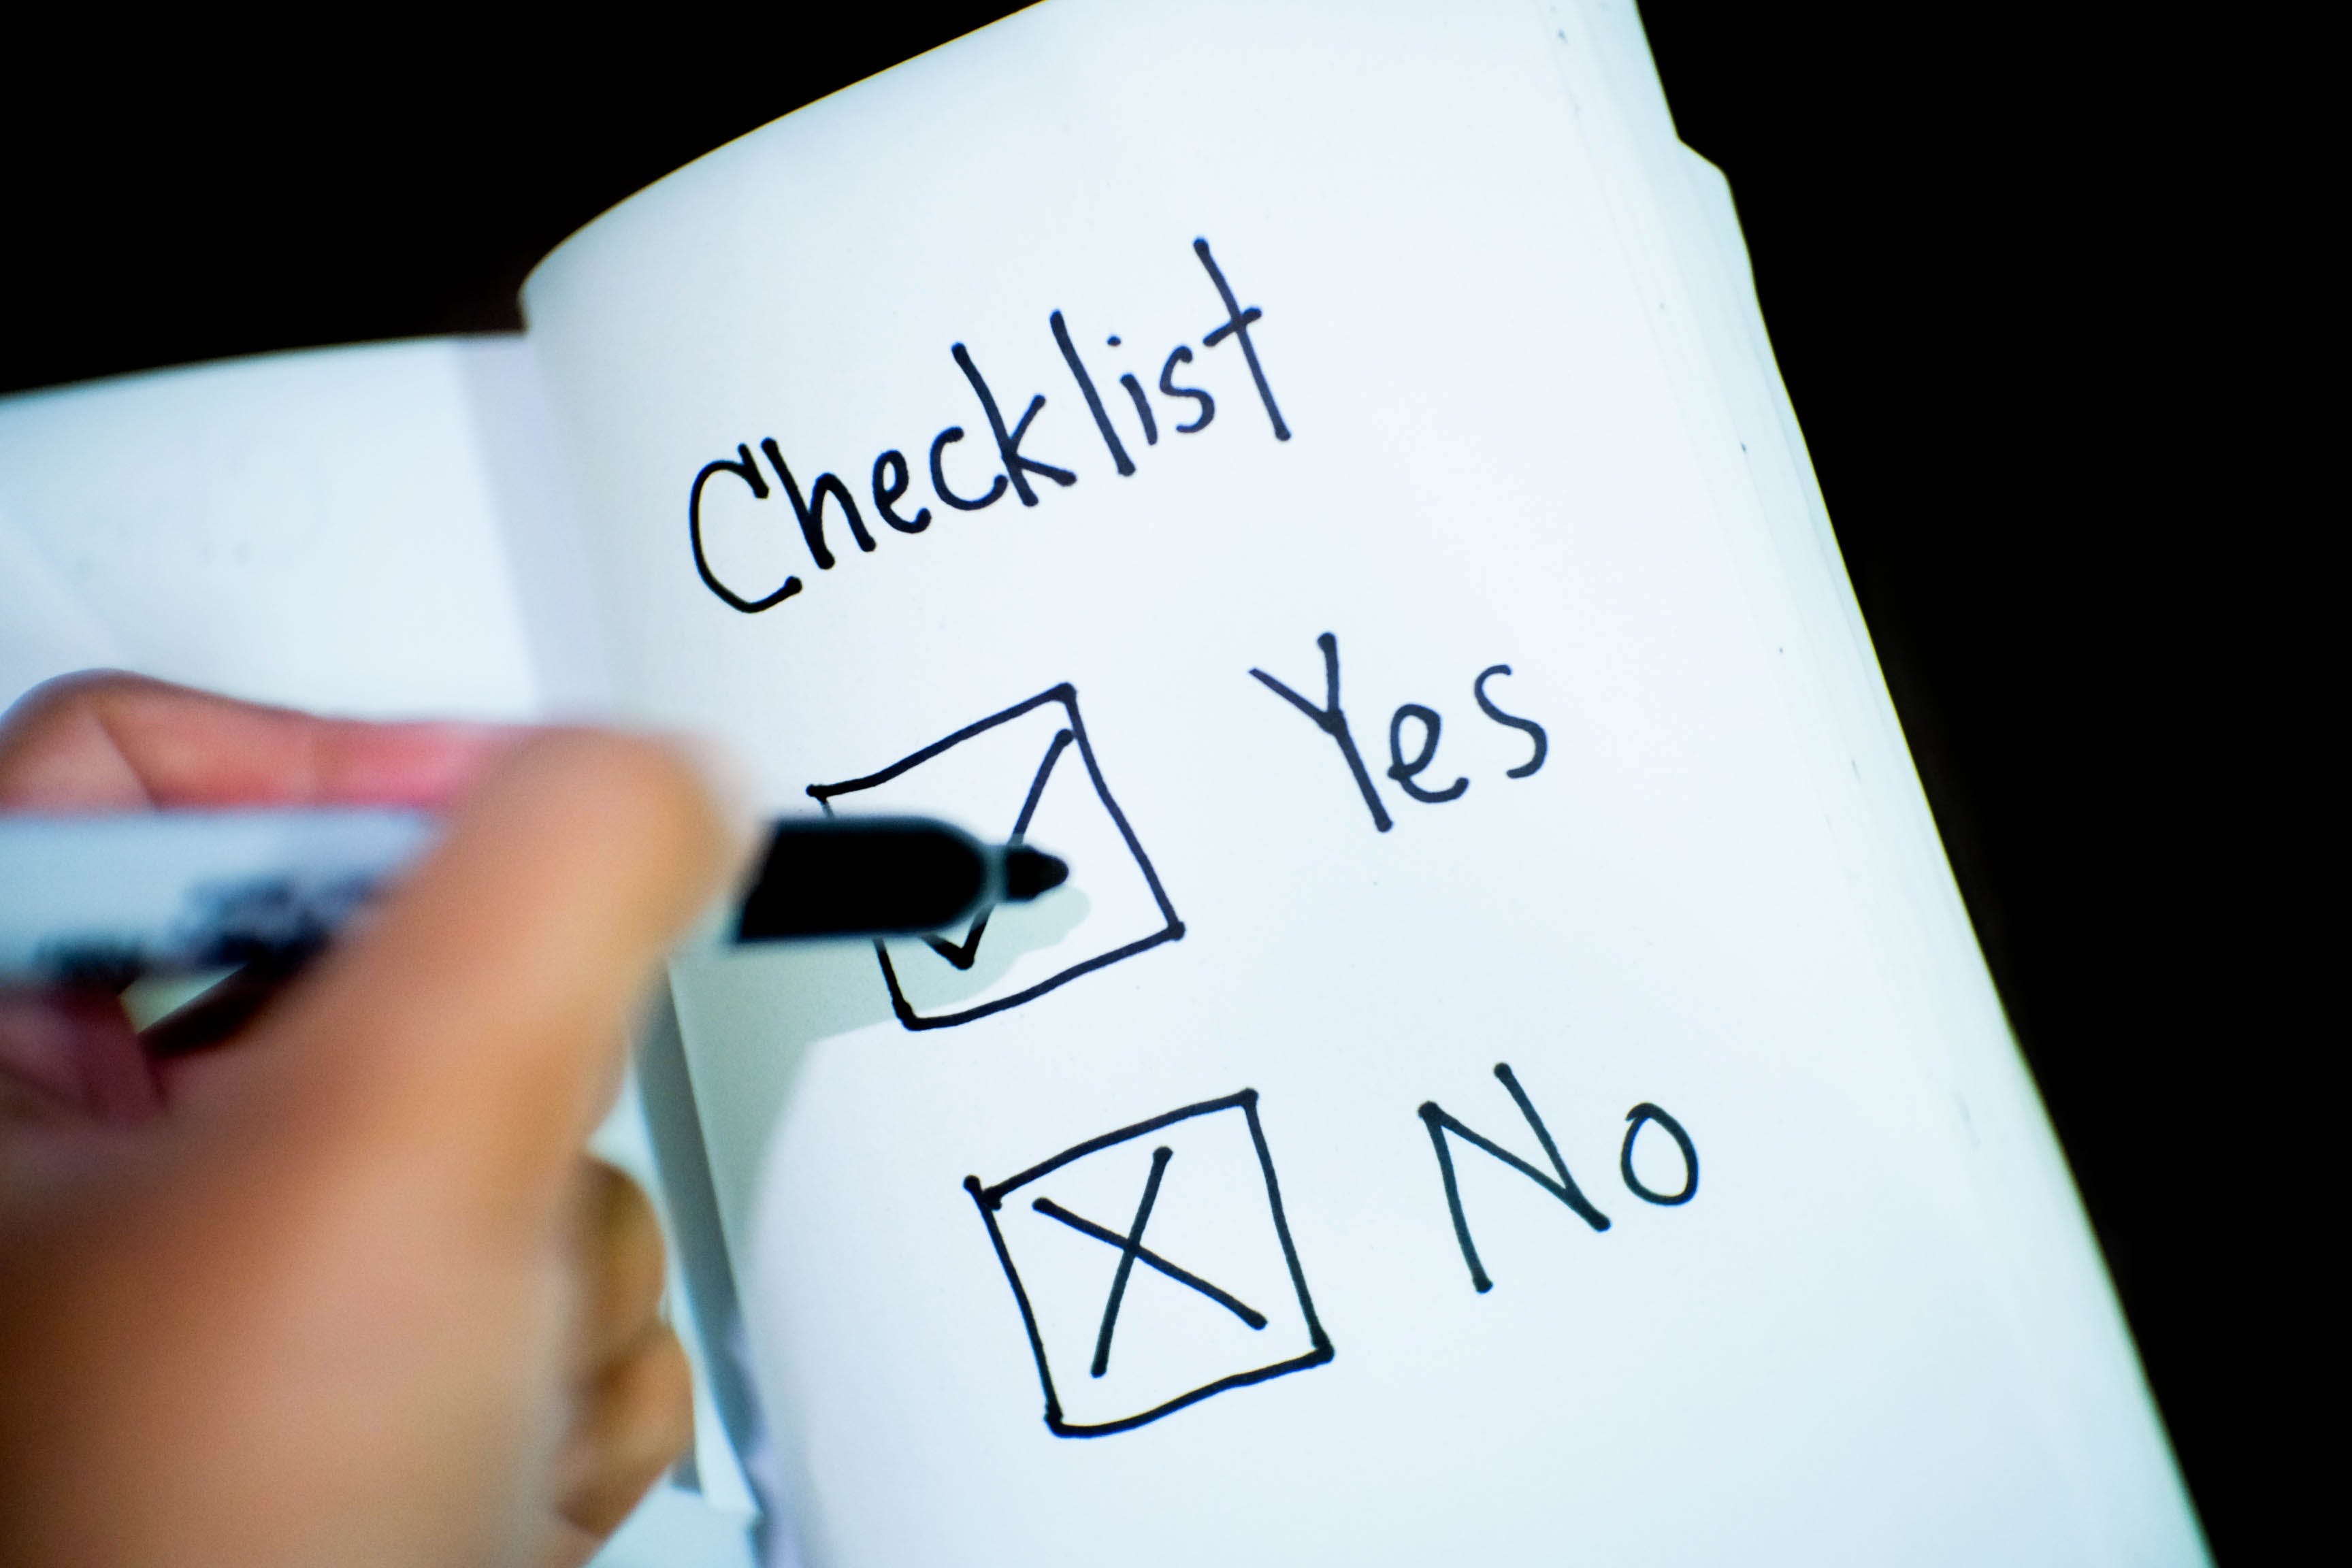 The Complete Home Care Agency Marketing Checklist